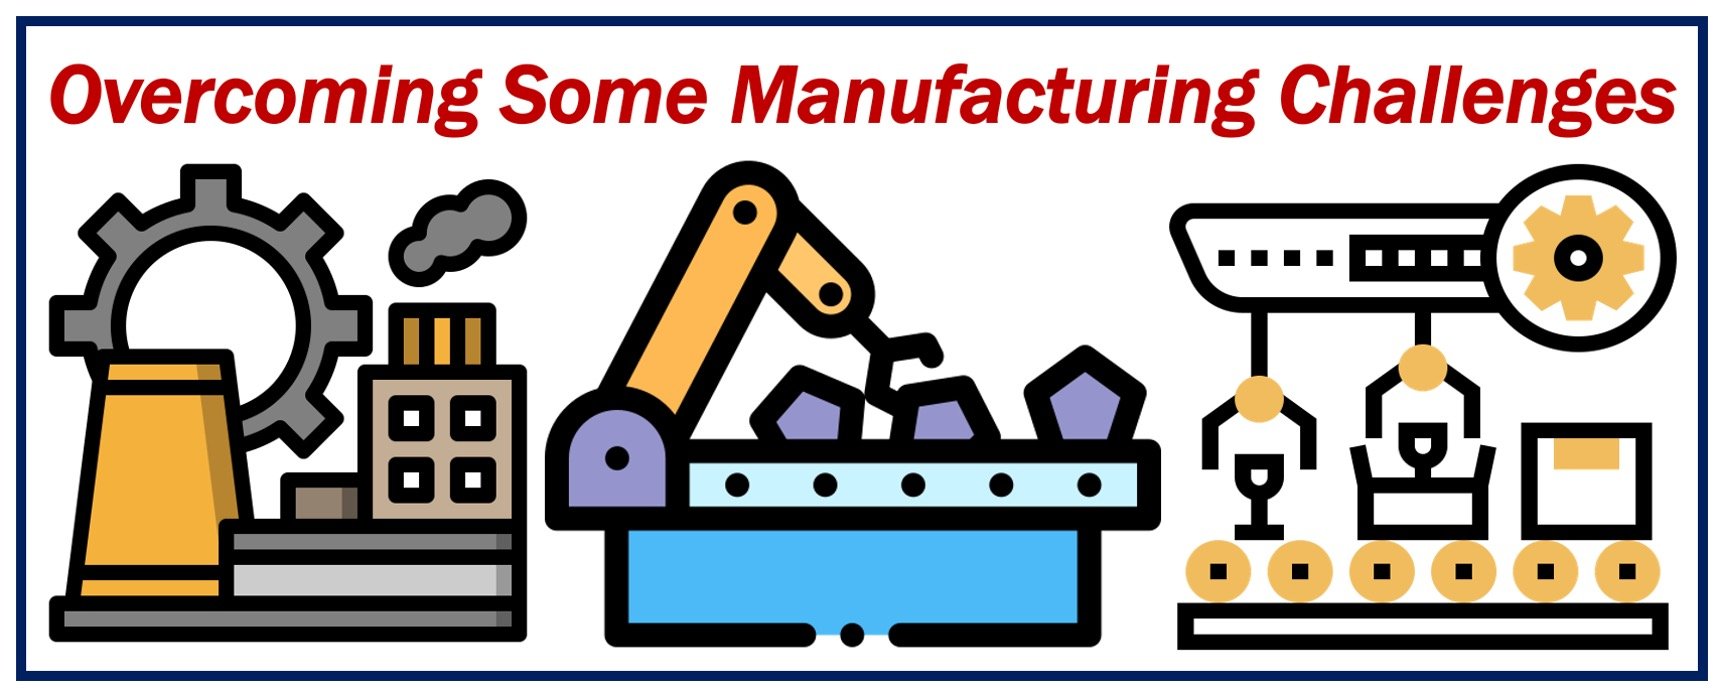 Overcoming some manufacturing challenges